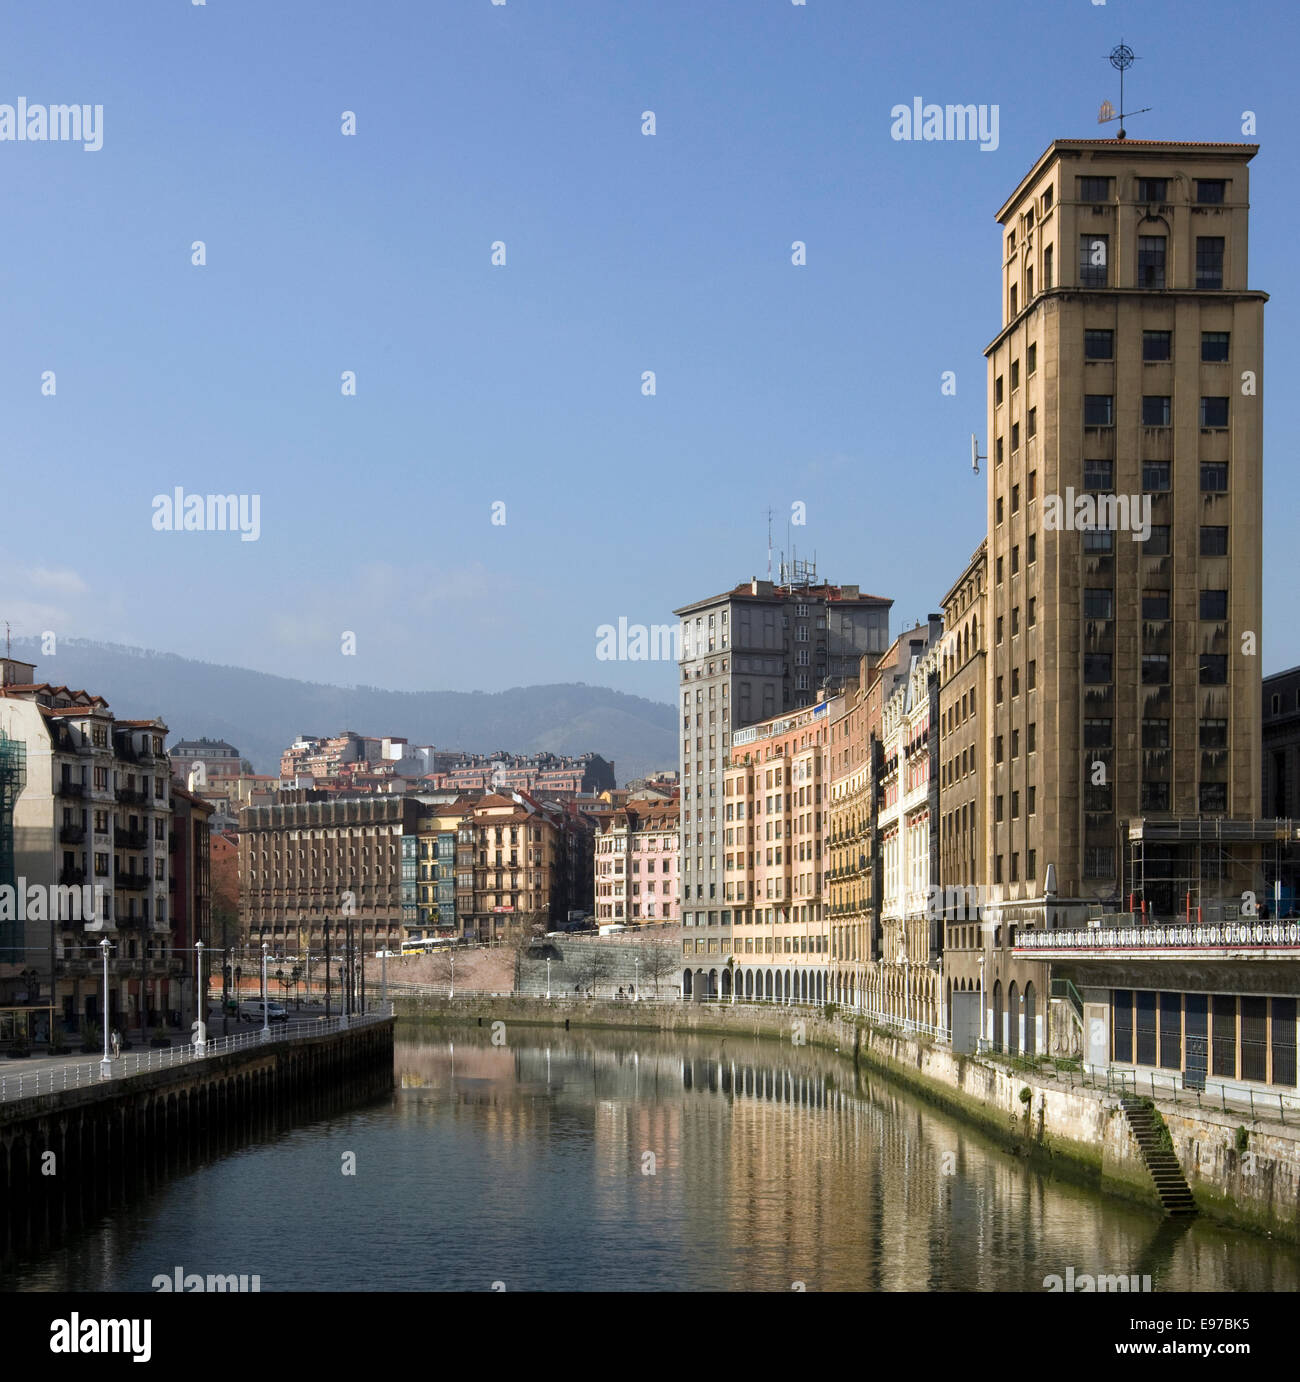 City of Bilbao in Spain with river Nevrion Stock Photo